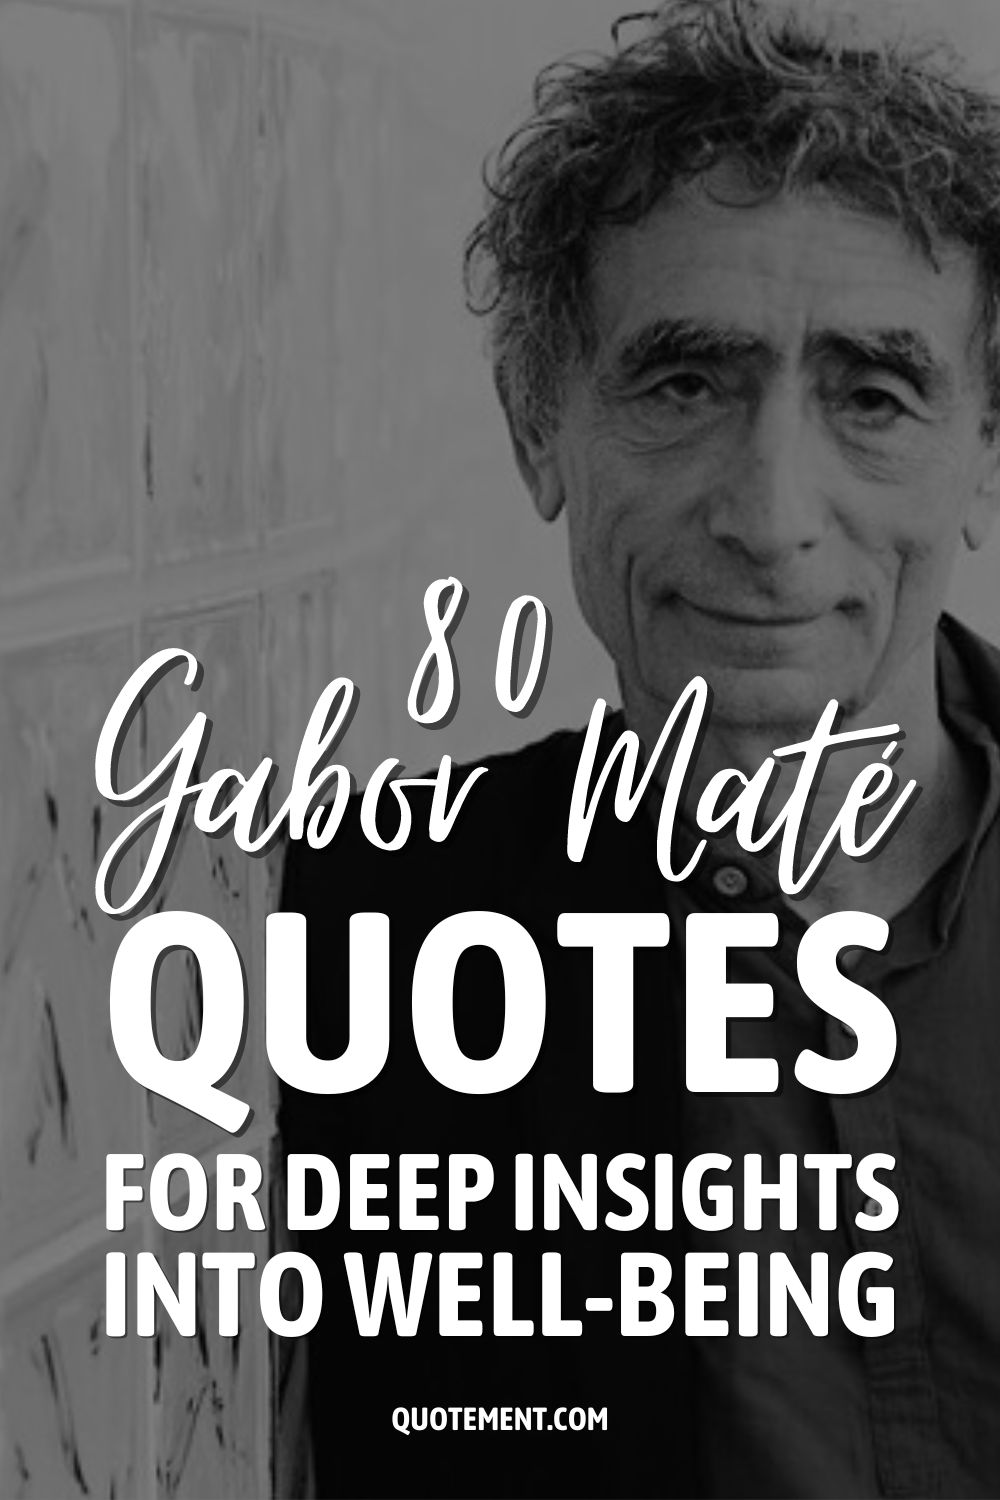 80 Gabor Maté Quotes For Deep Insights Into Well-Being
